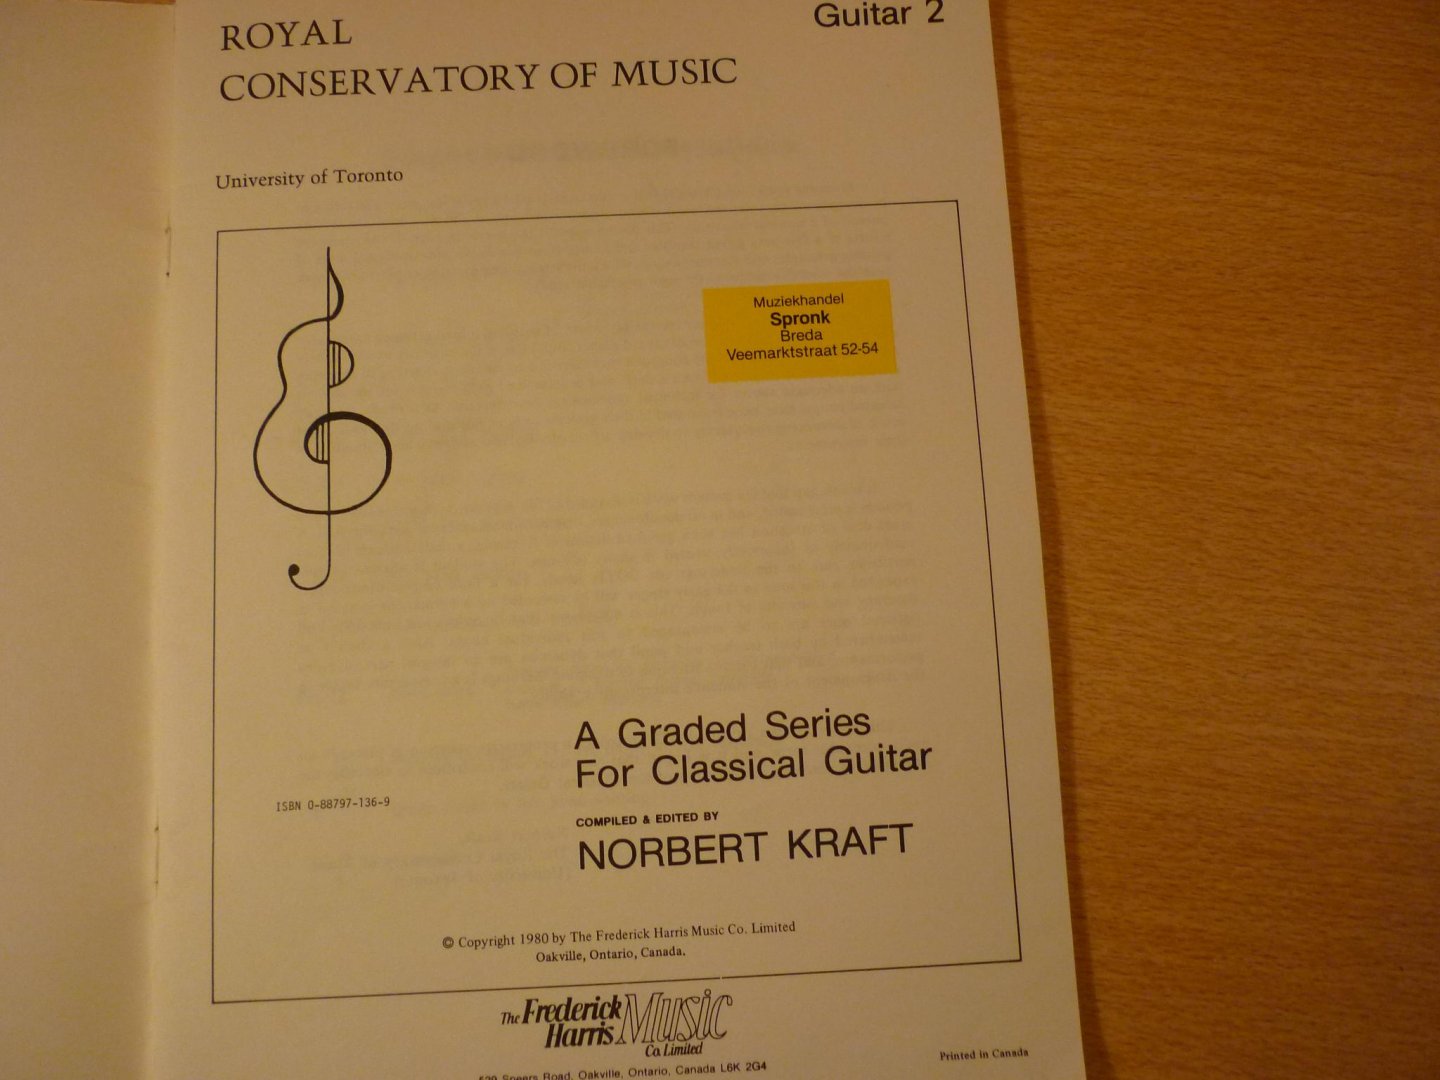 Kraft; Norbert - Royal Conservatory of music - Guitar 2; A graded series for classical guitar